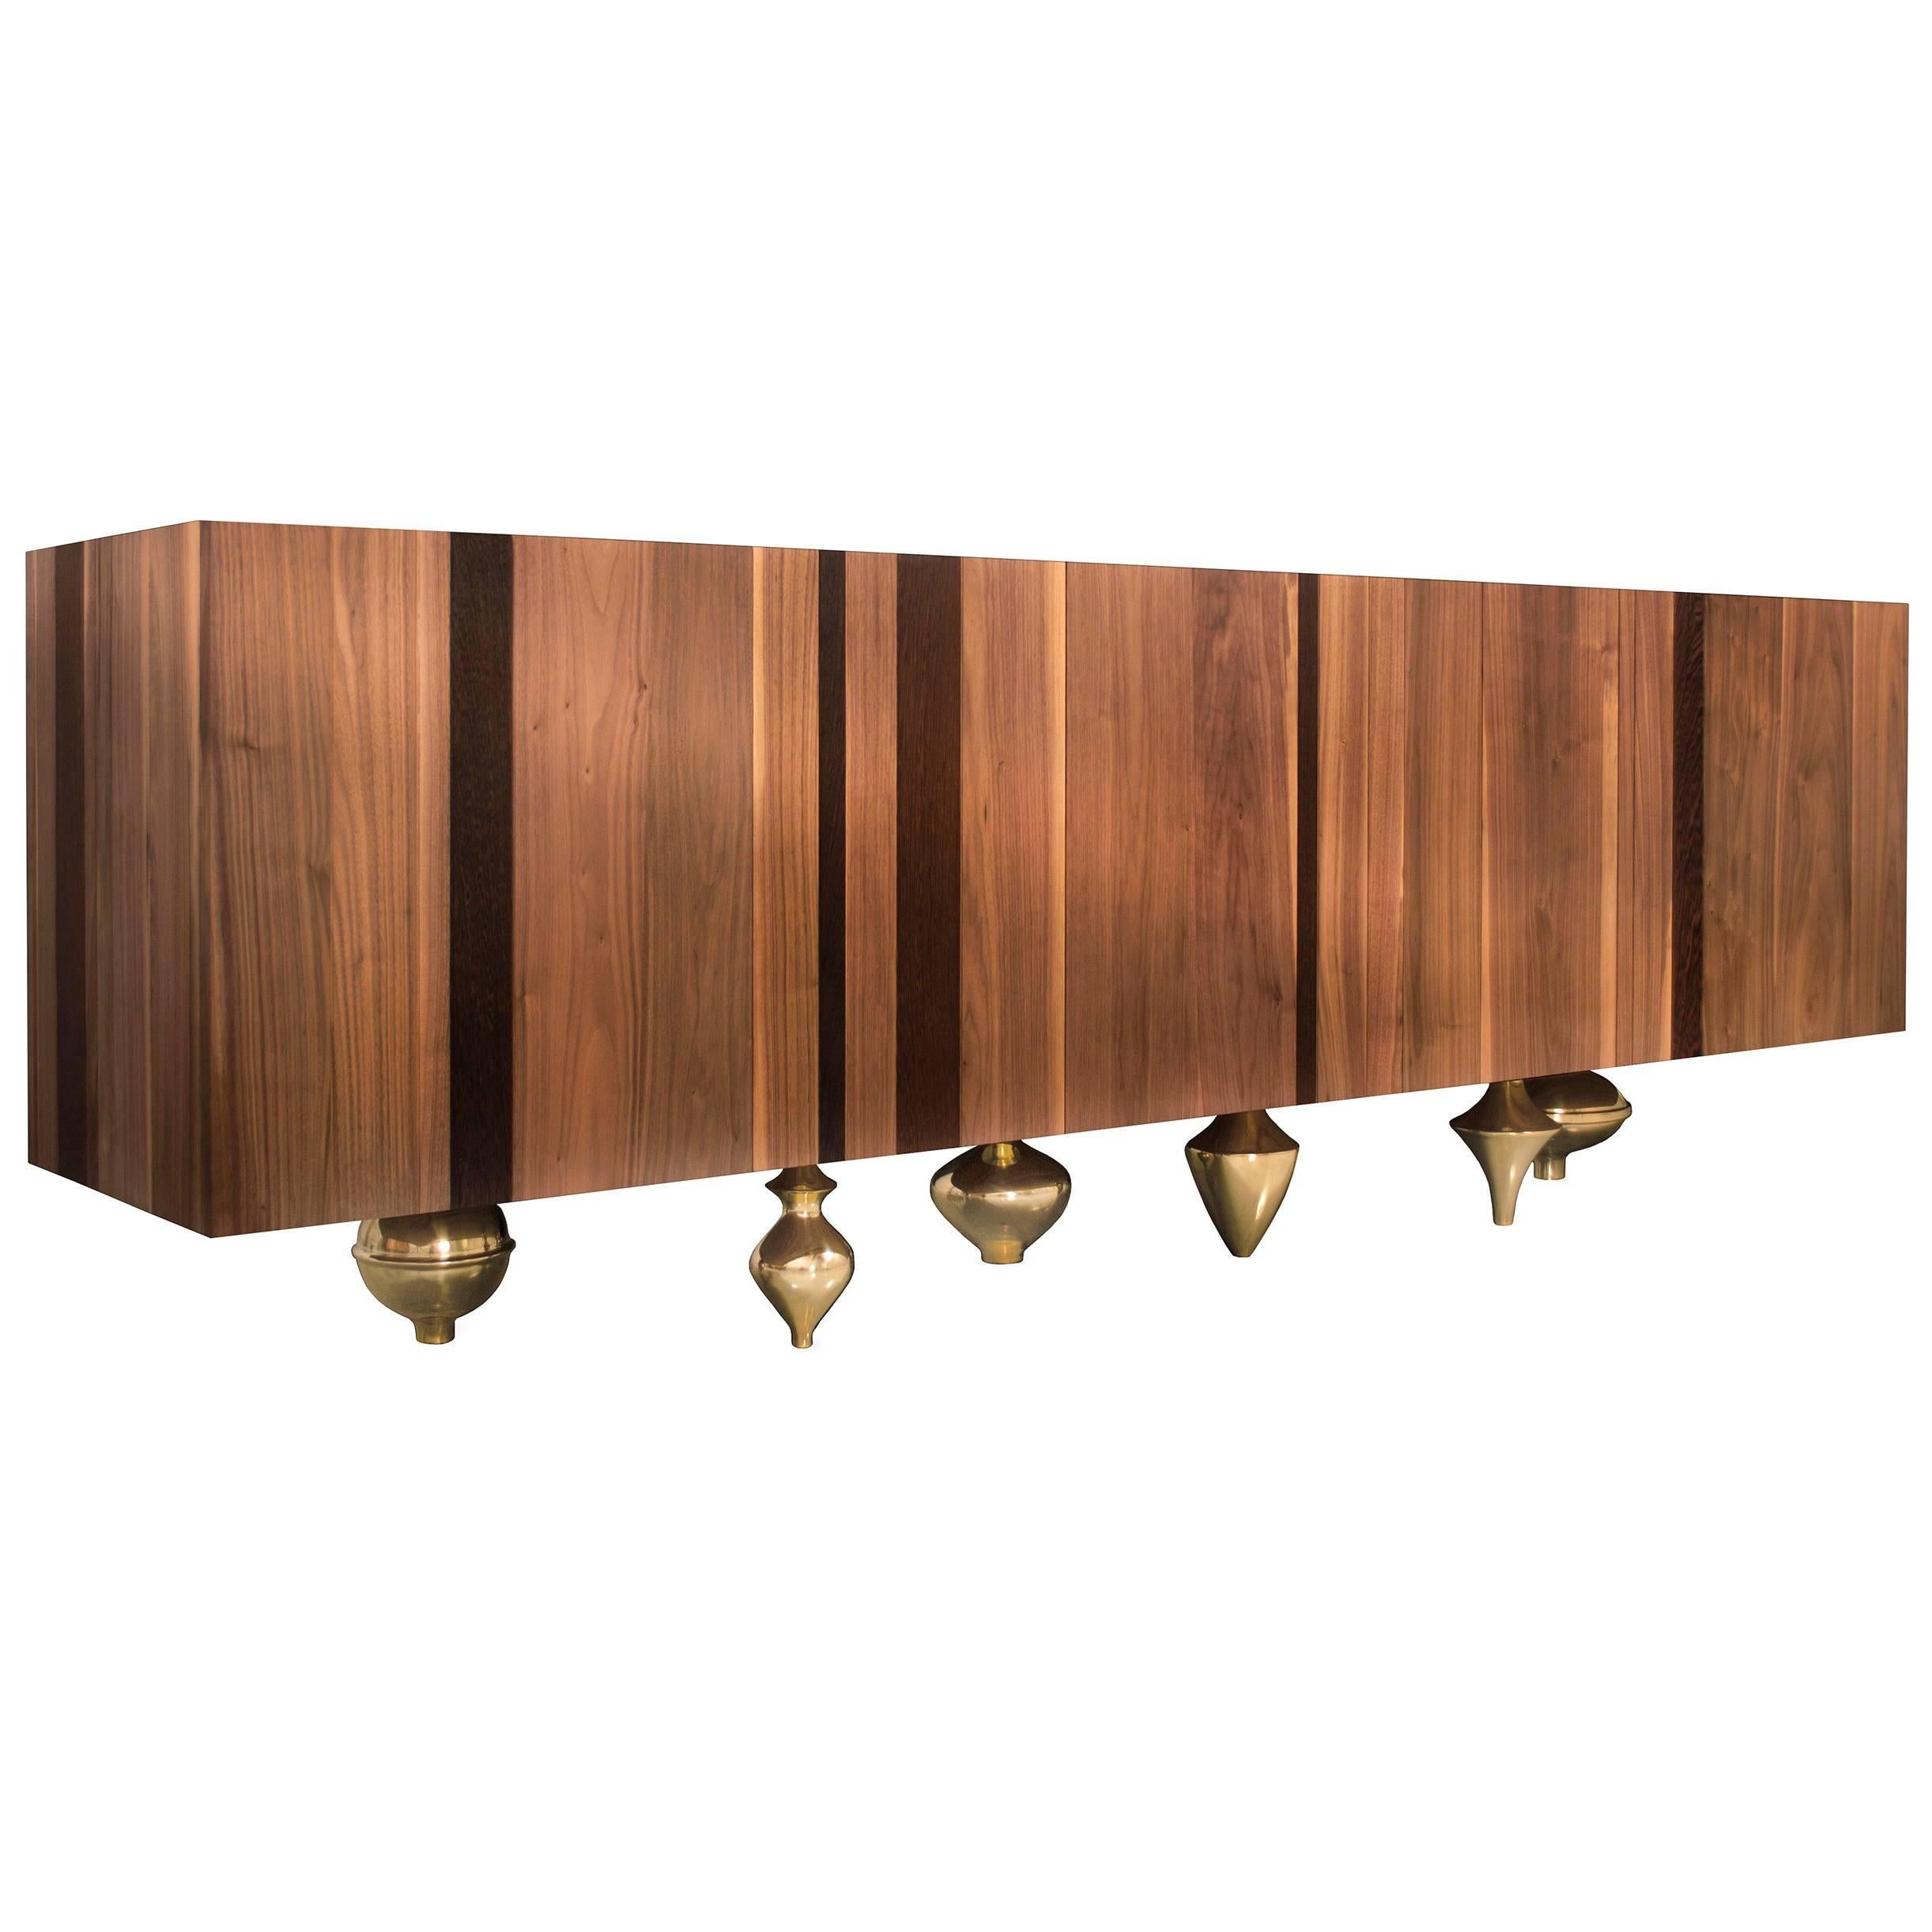 "Il Pezzo 1 Credenza" modern buffet in solid walnut with marble top